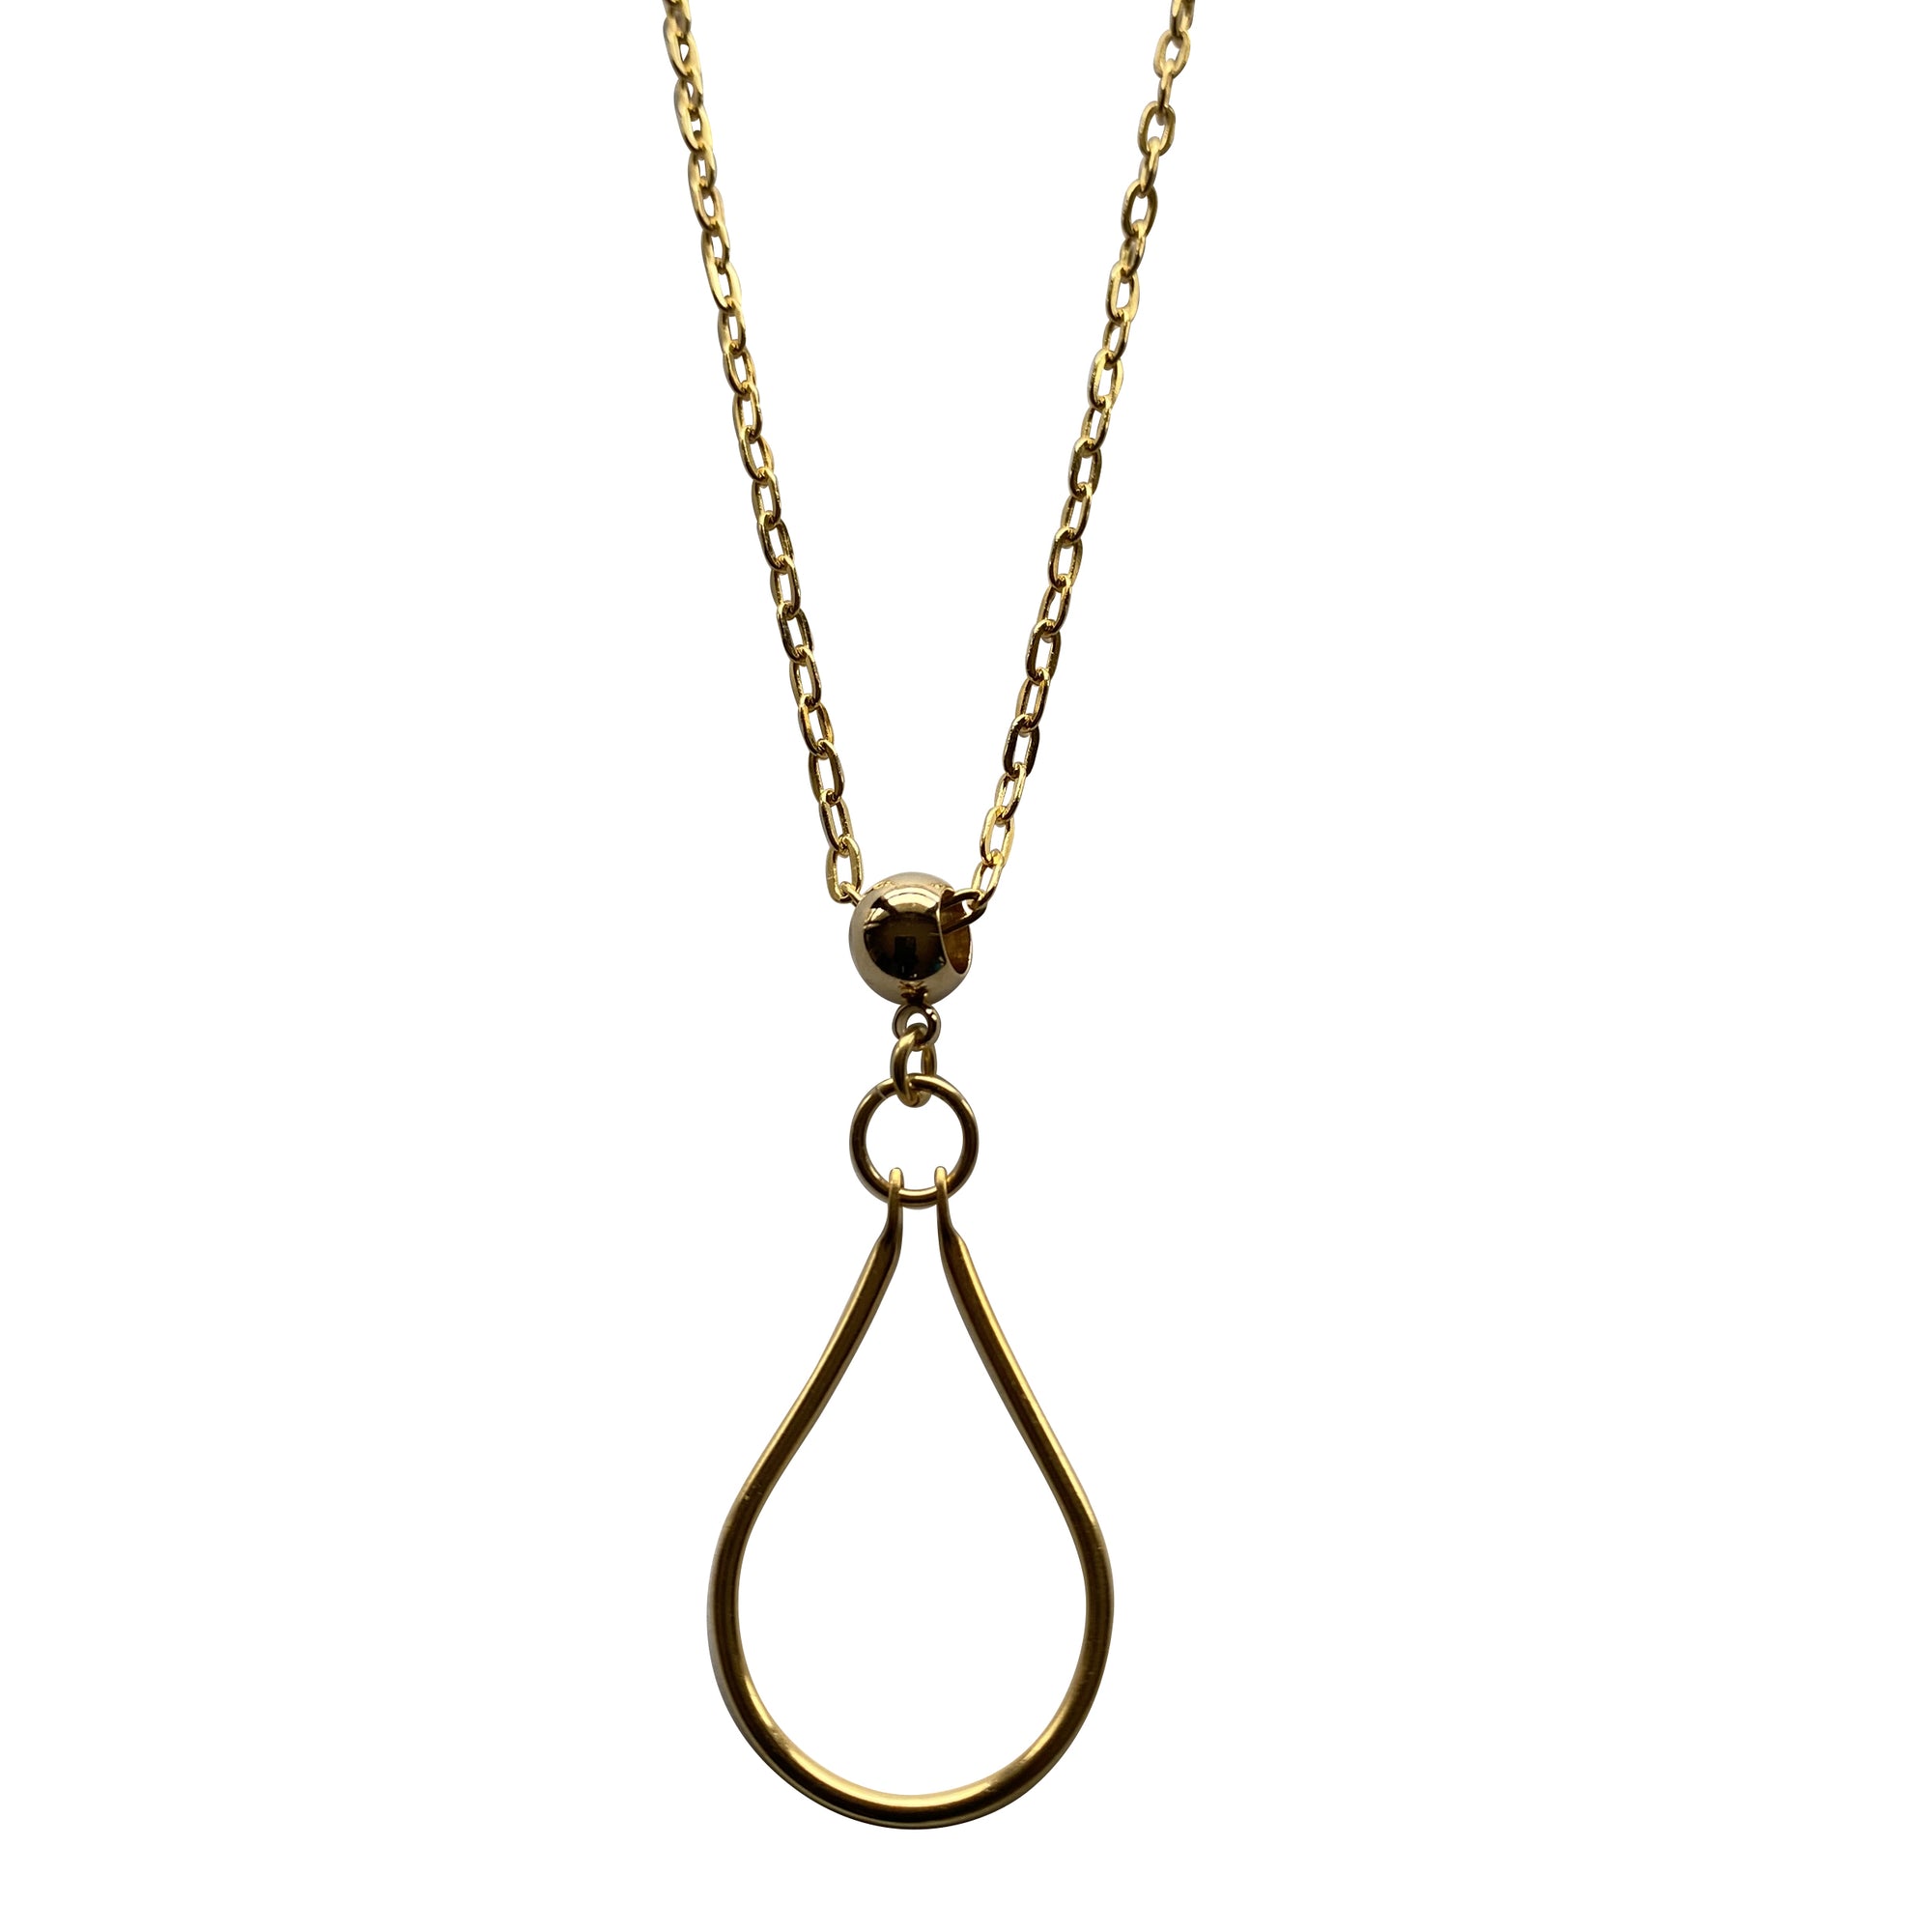 Gold Chain Necklace with Pear Shaped Gold Pendant